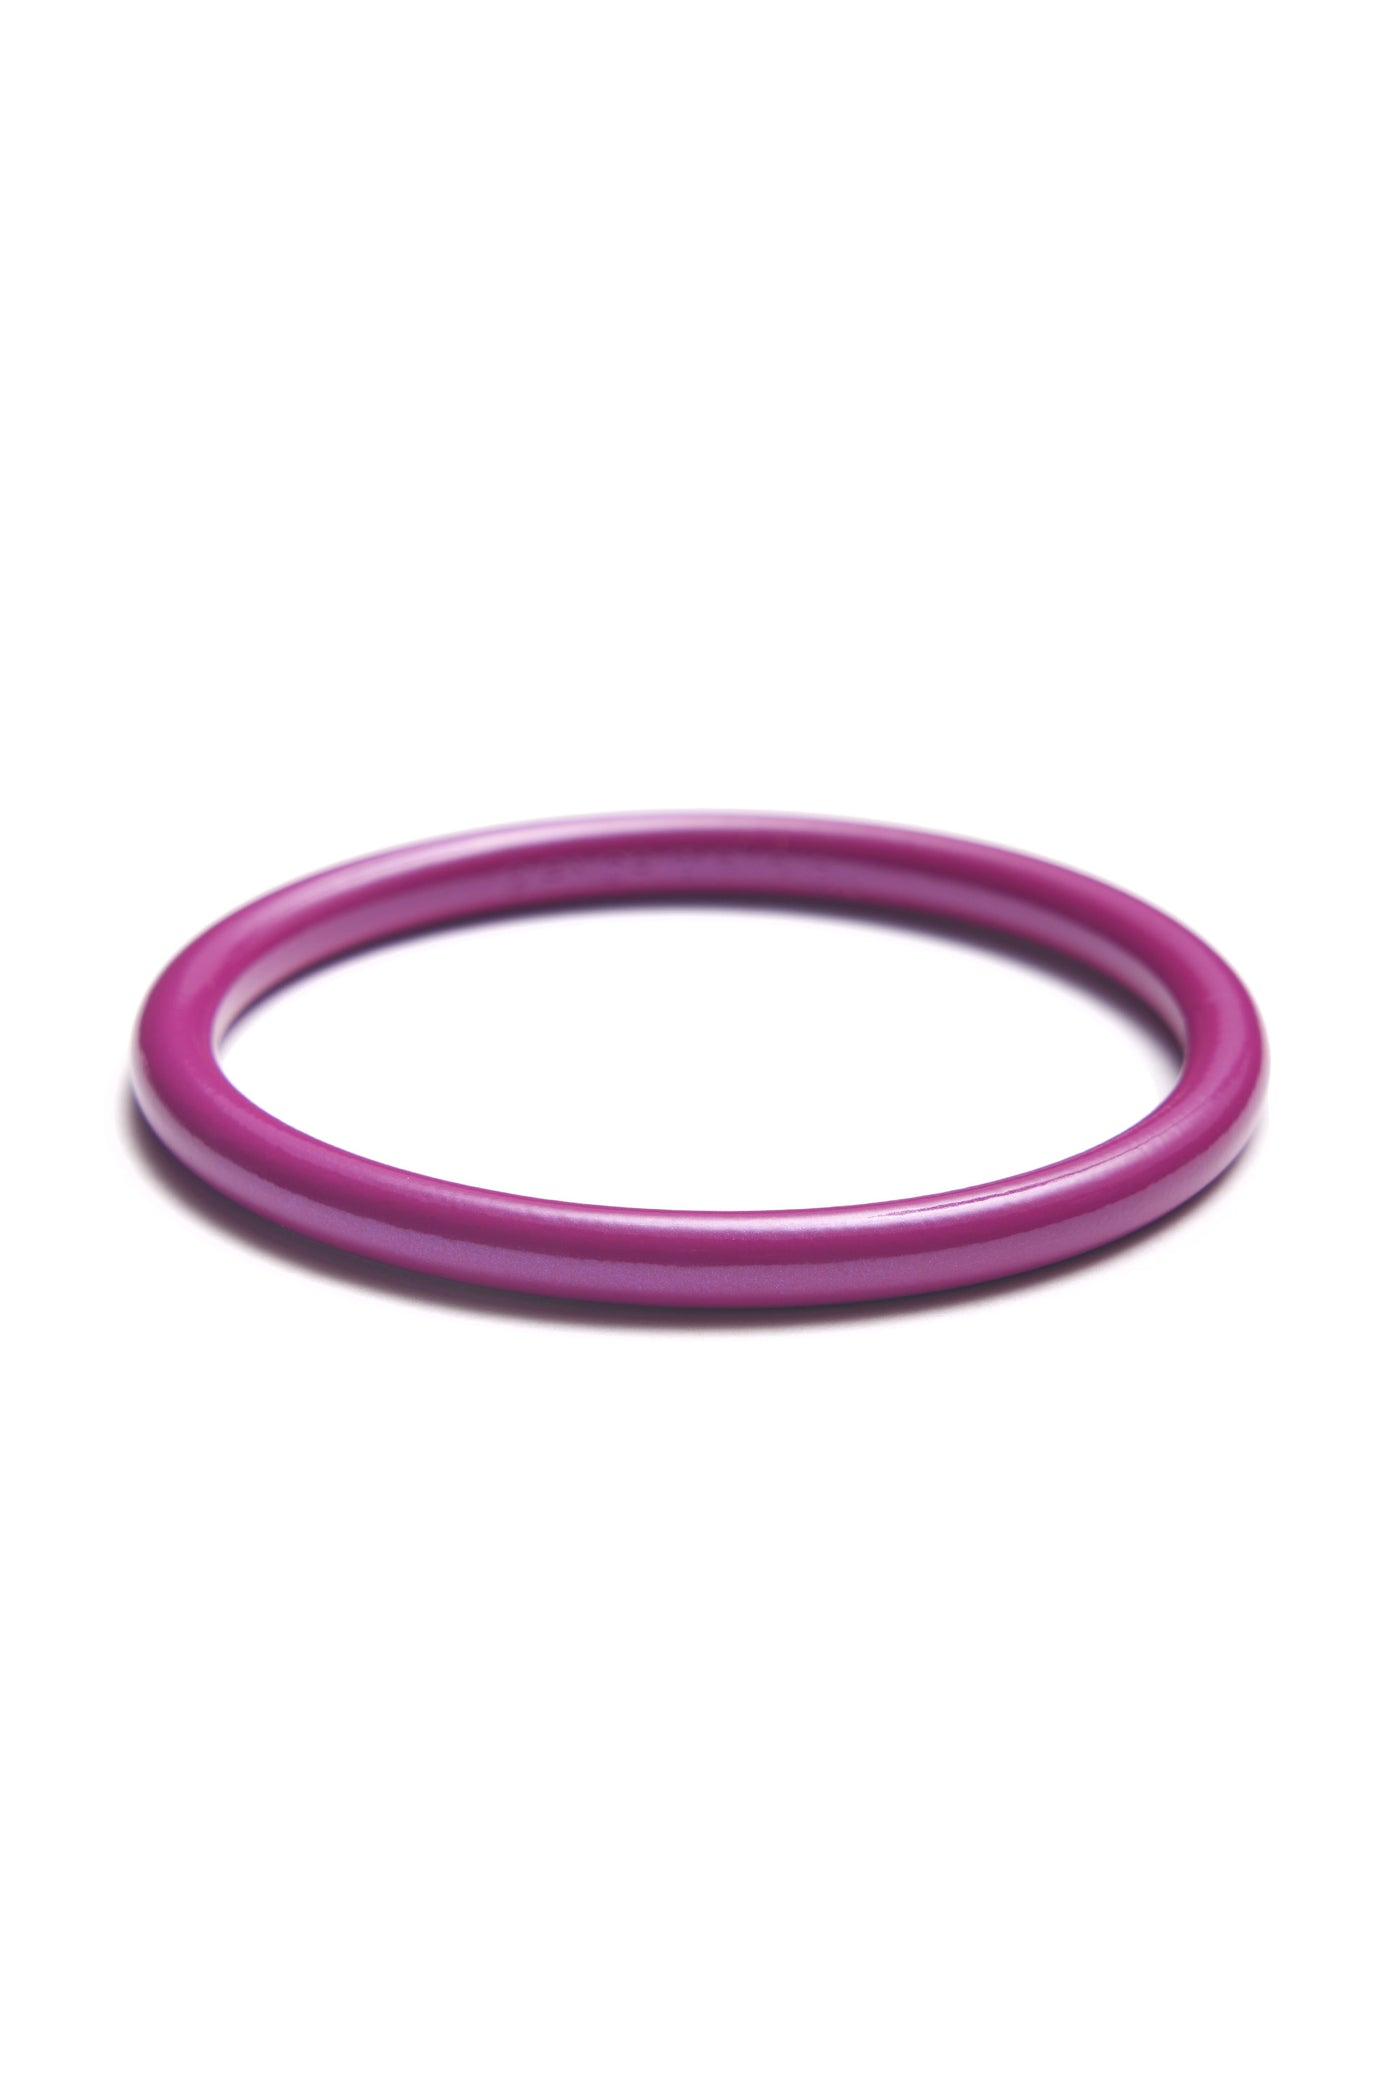 Bianca Mavrick Colore Bangle in Magental Side View